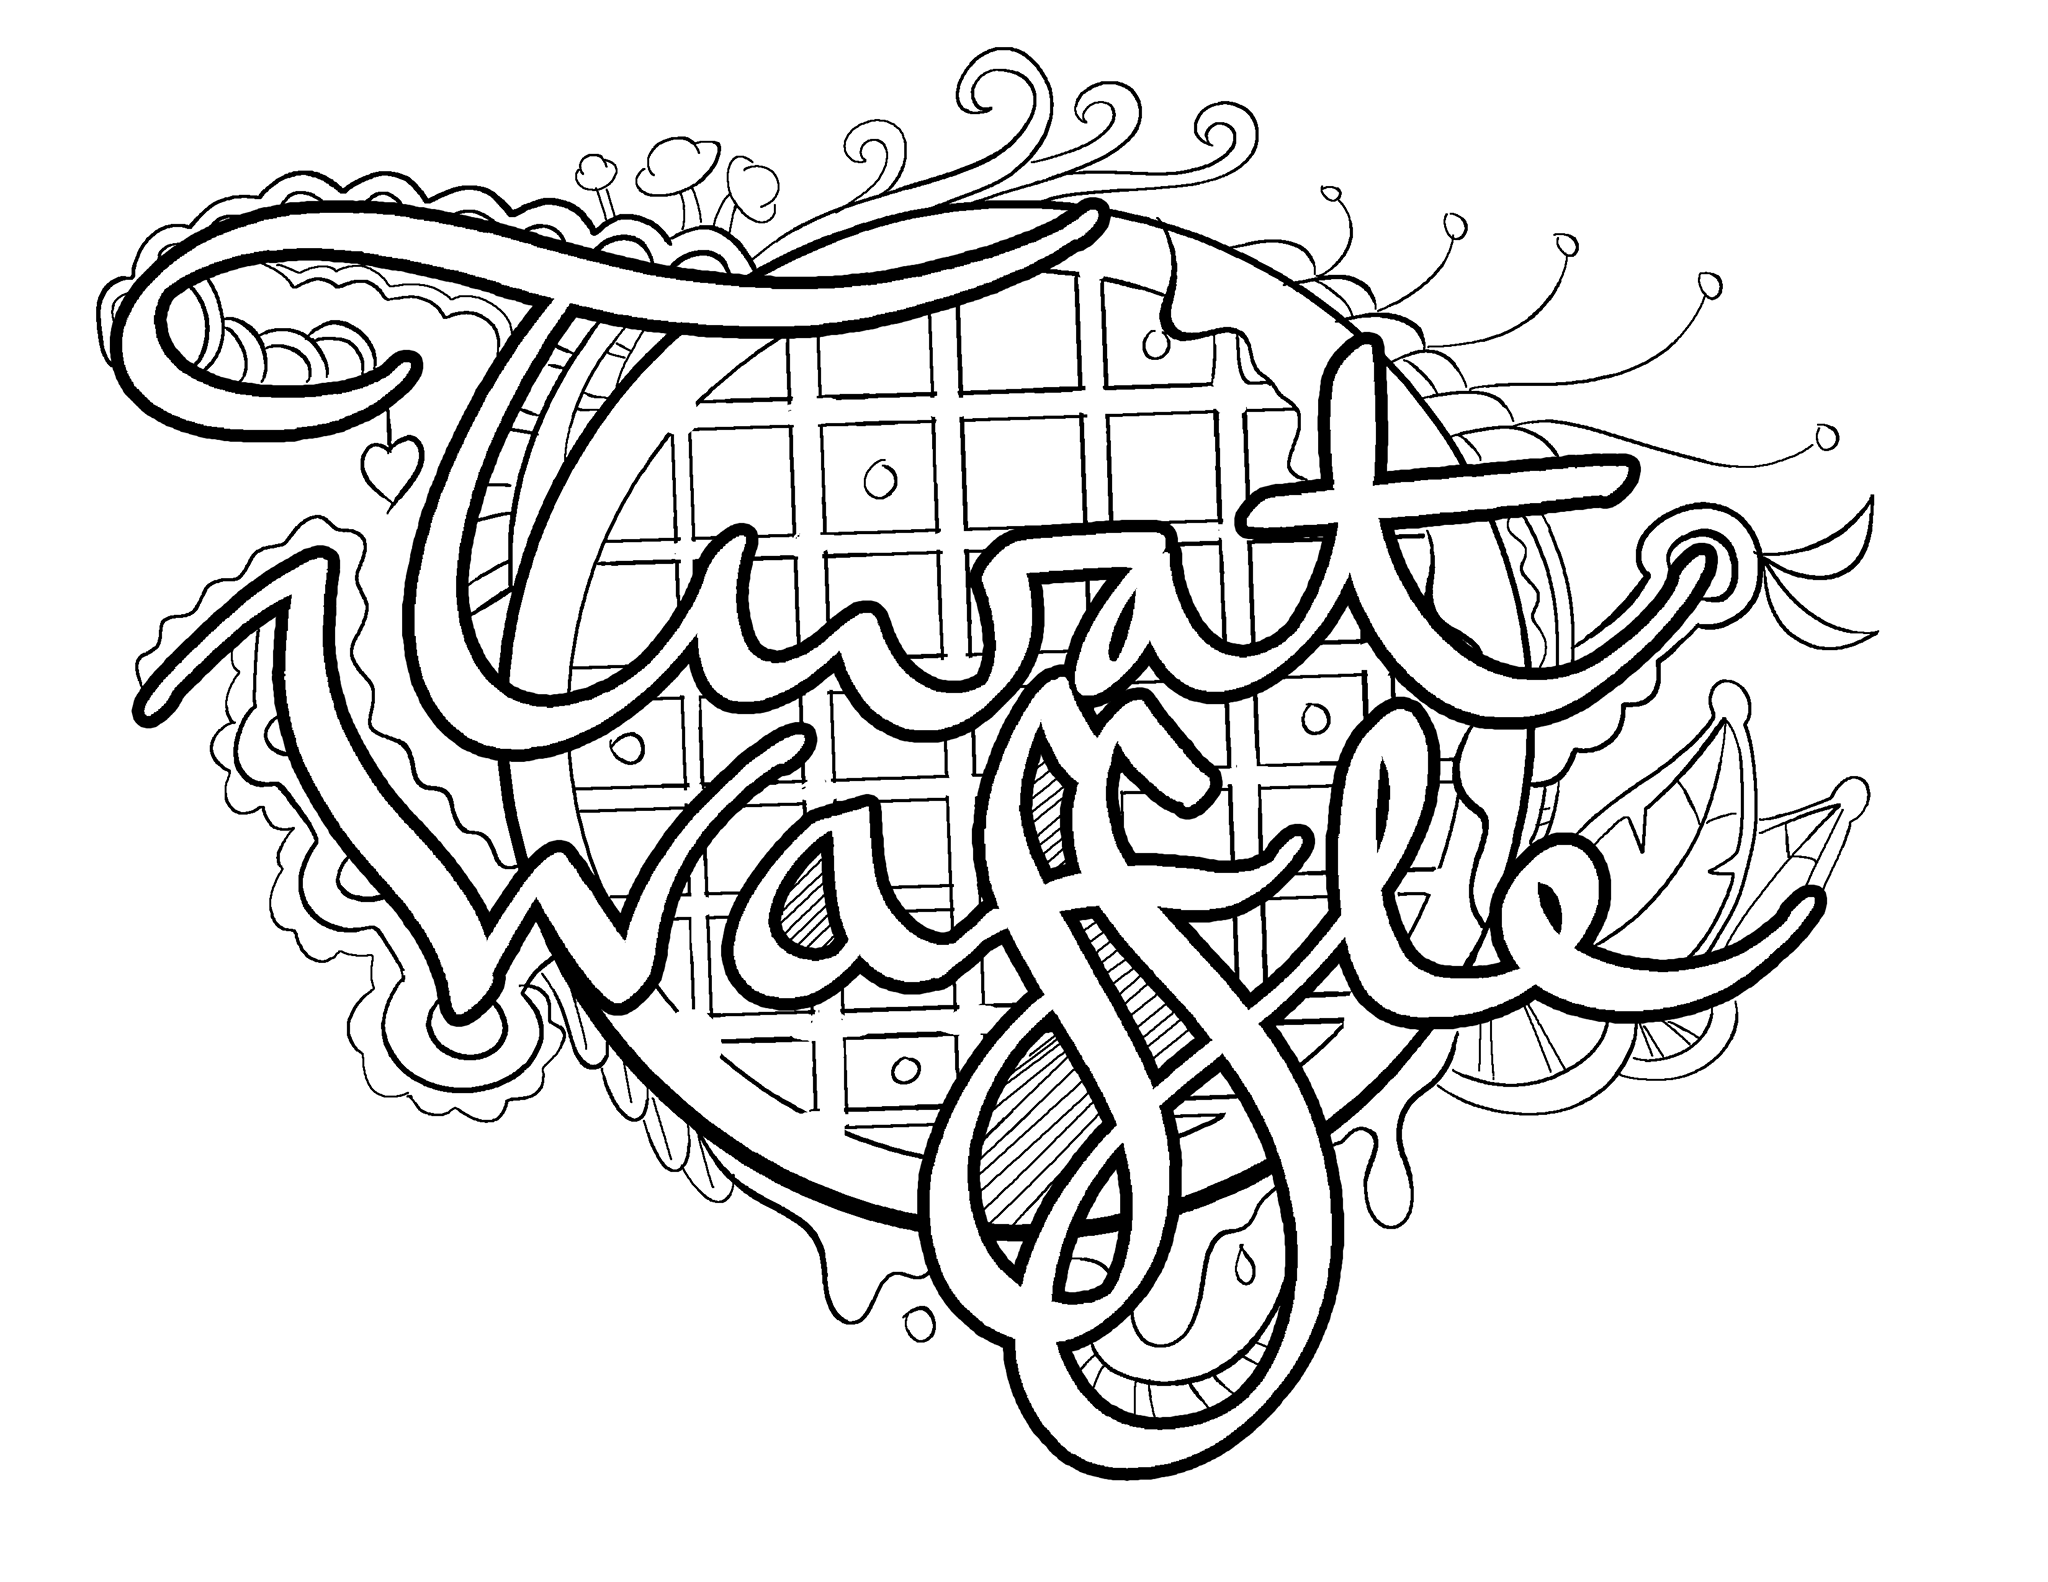 Waffle Coloring Page at GetColorings.com | Free printable colorings